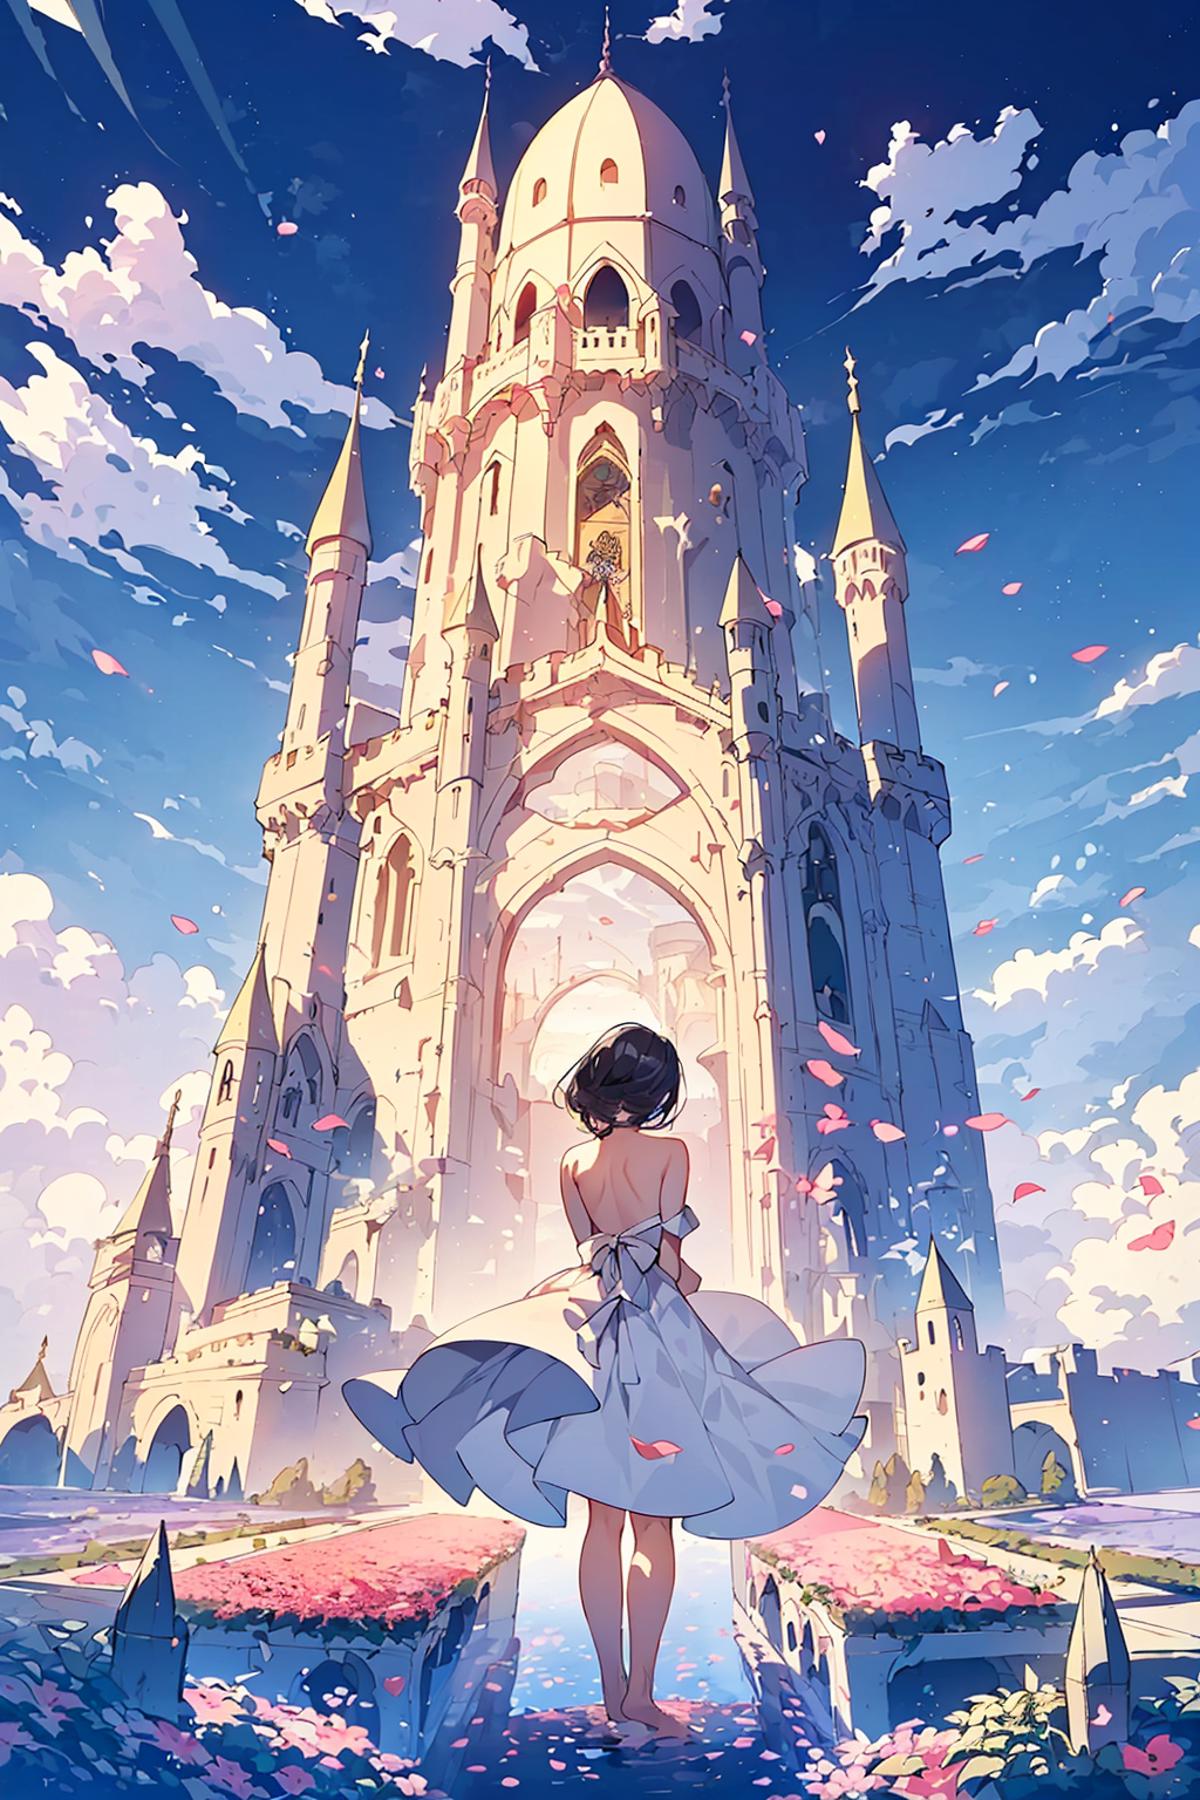 Artistic Anime Drawing of a Woman Standing in Front of a Majestic Castle